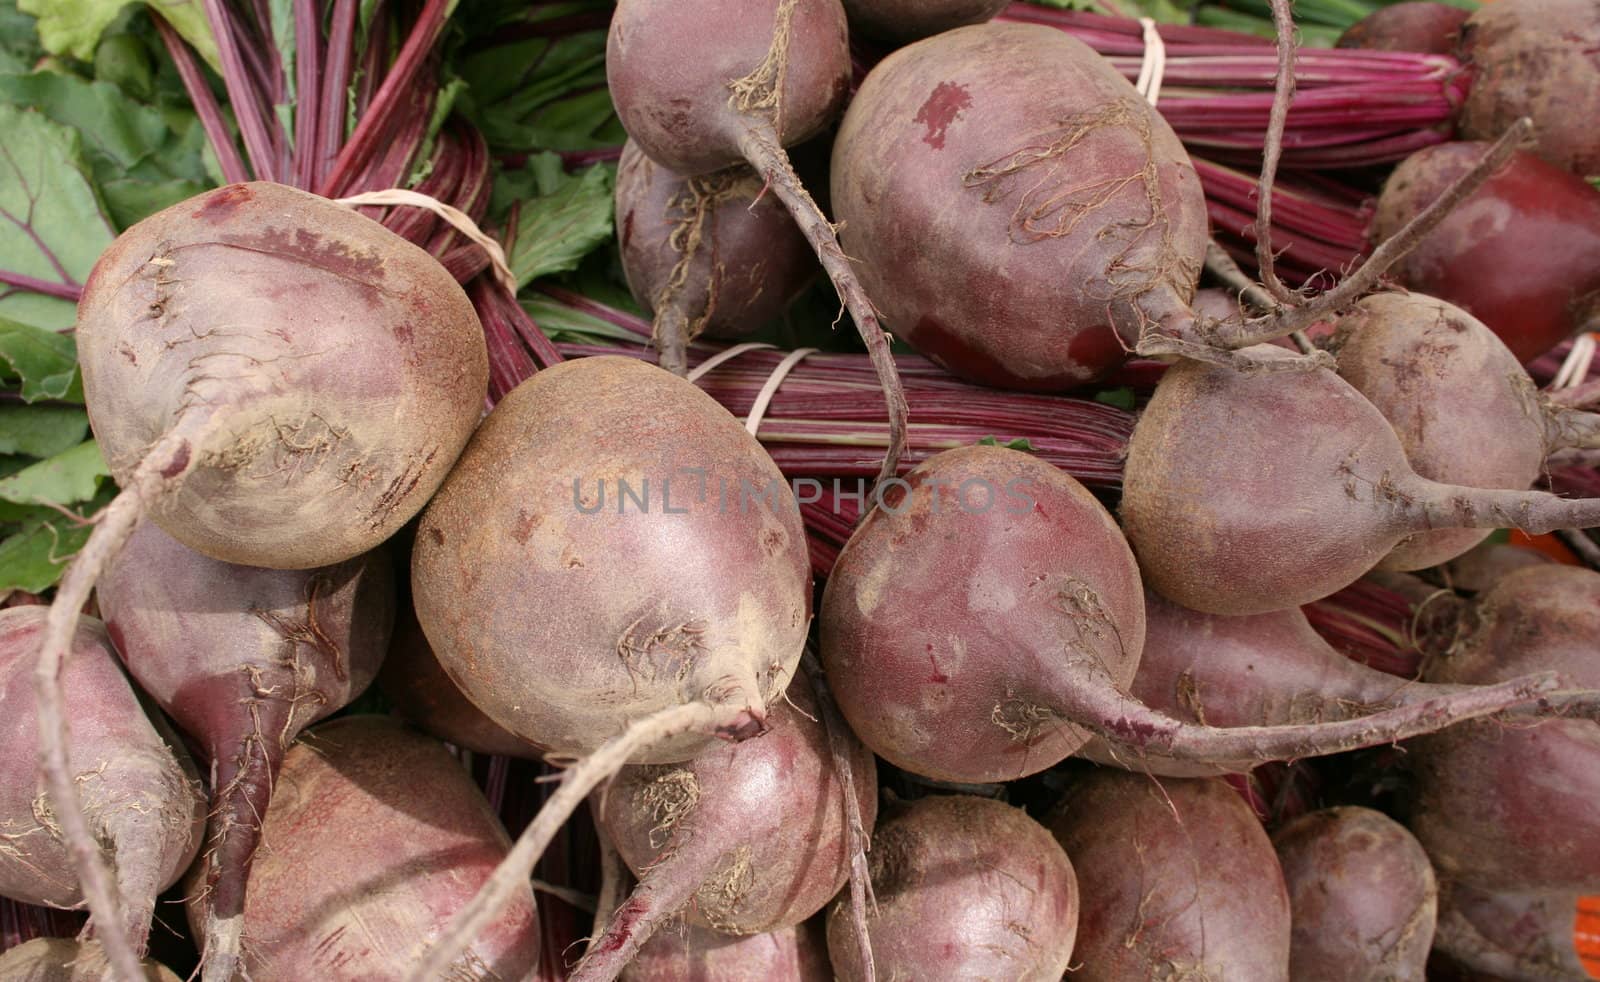 Organic beets freshly picked and available at a farmers' market